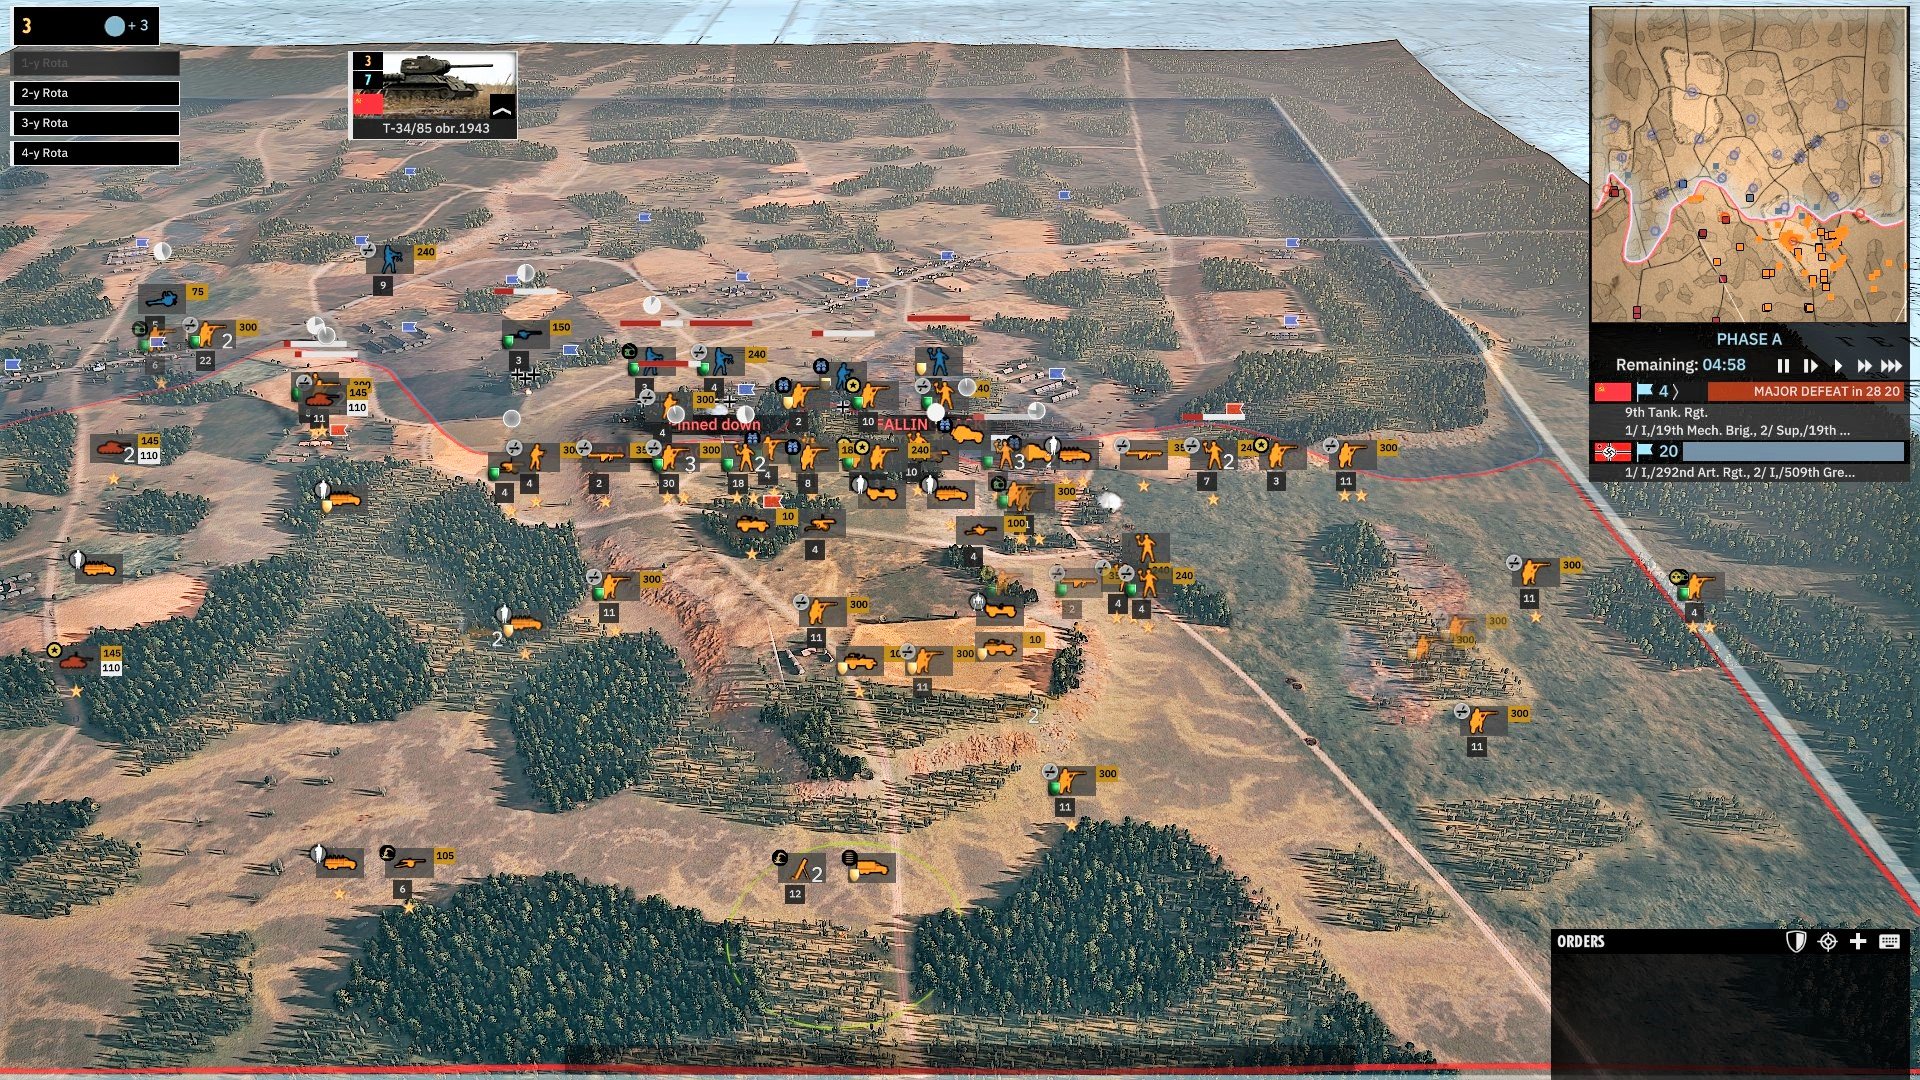 Best WW2 games - screenshot from Steel Division 2 showing a large battle with many unit symbols converging on an area